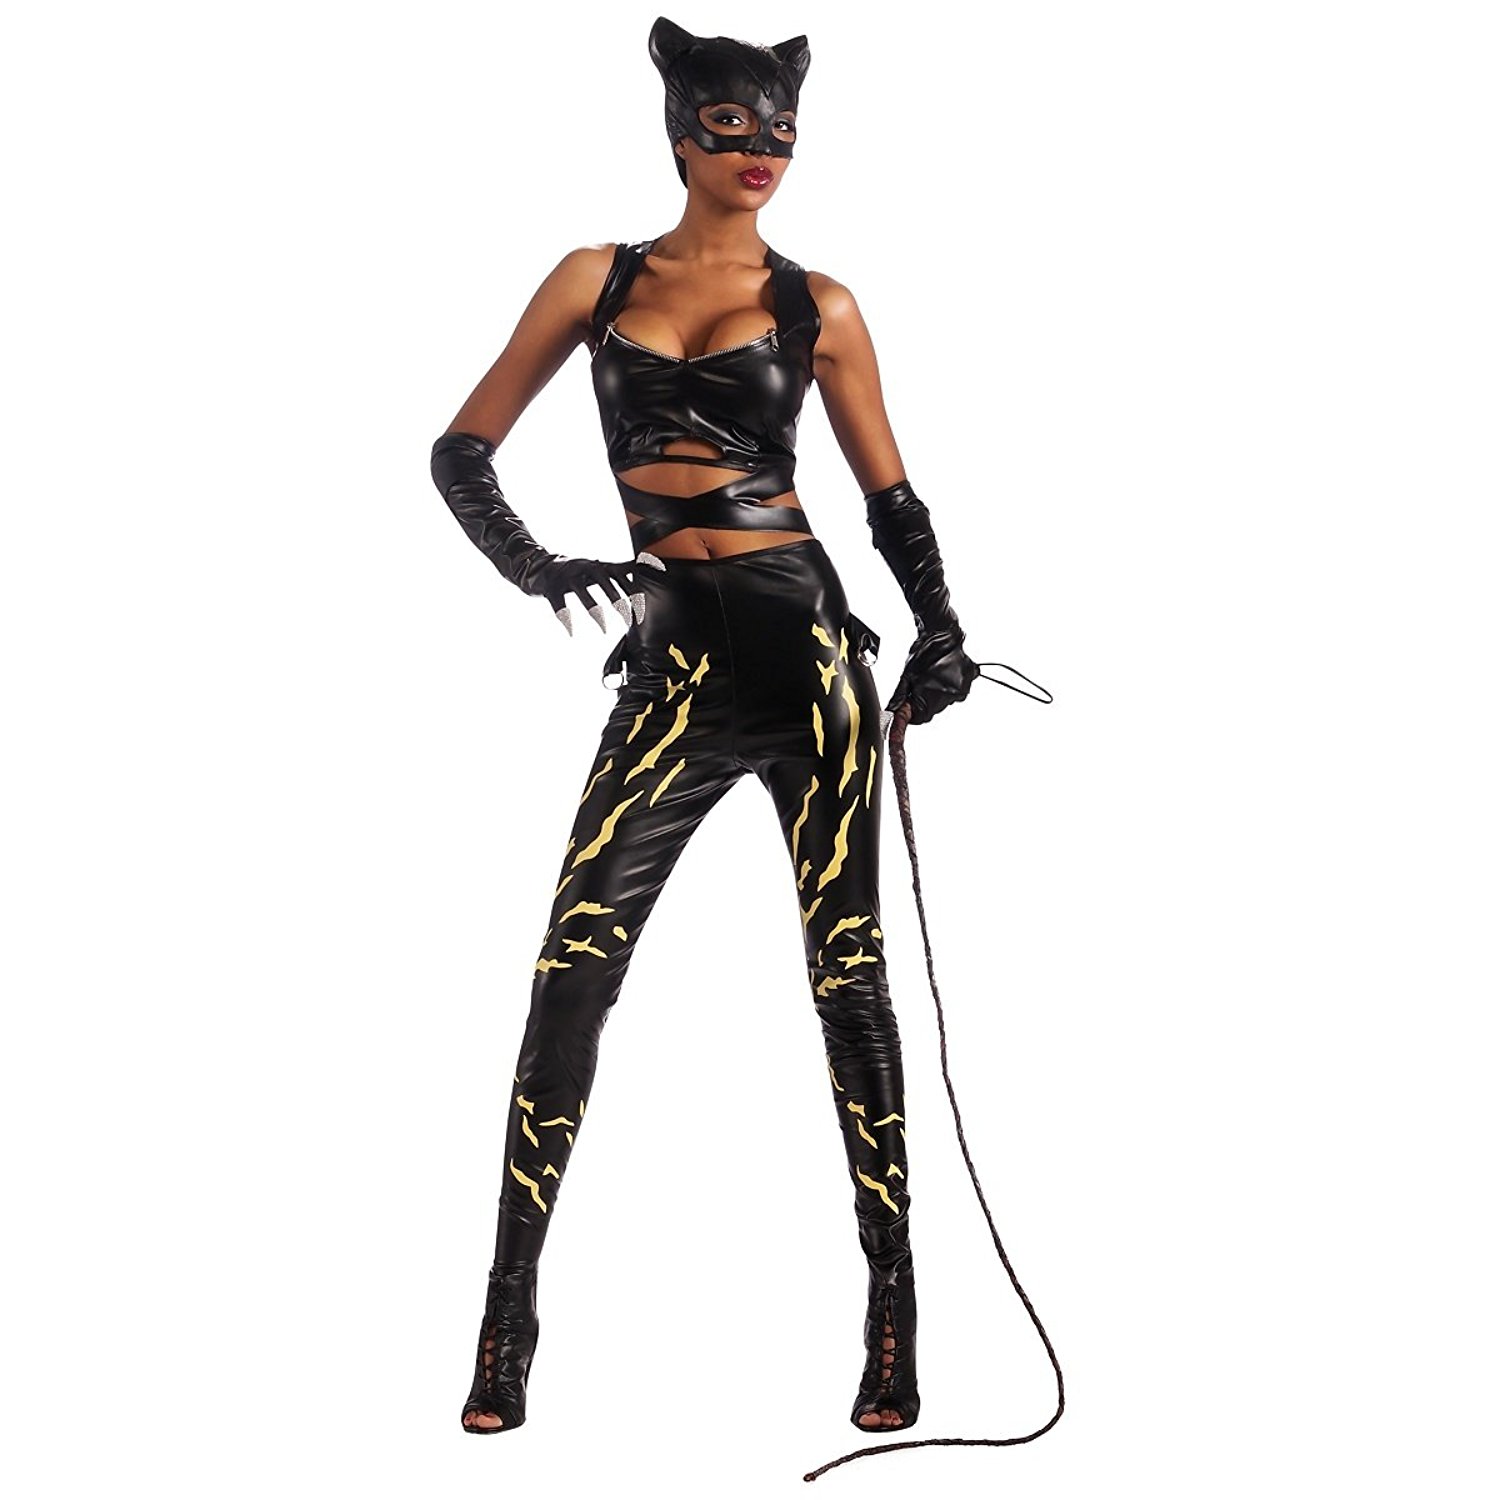 Amazon.com: Rubies DC Comics Deluxe Catwoman Adult Costume - Large ...